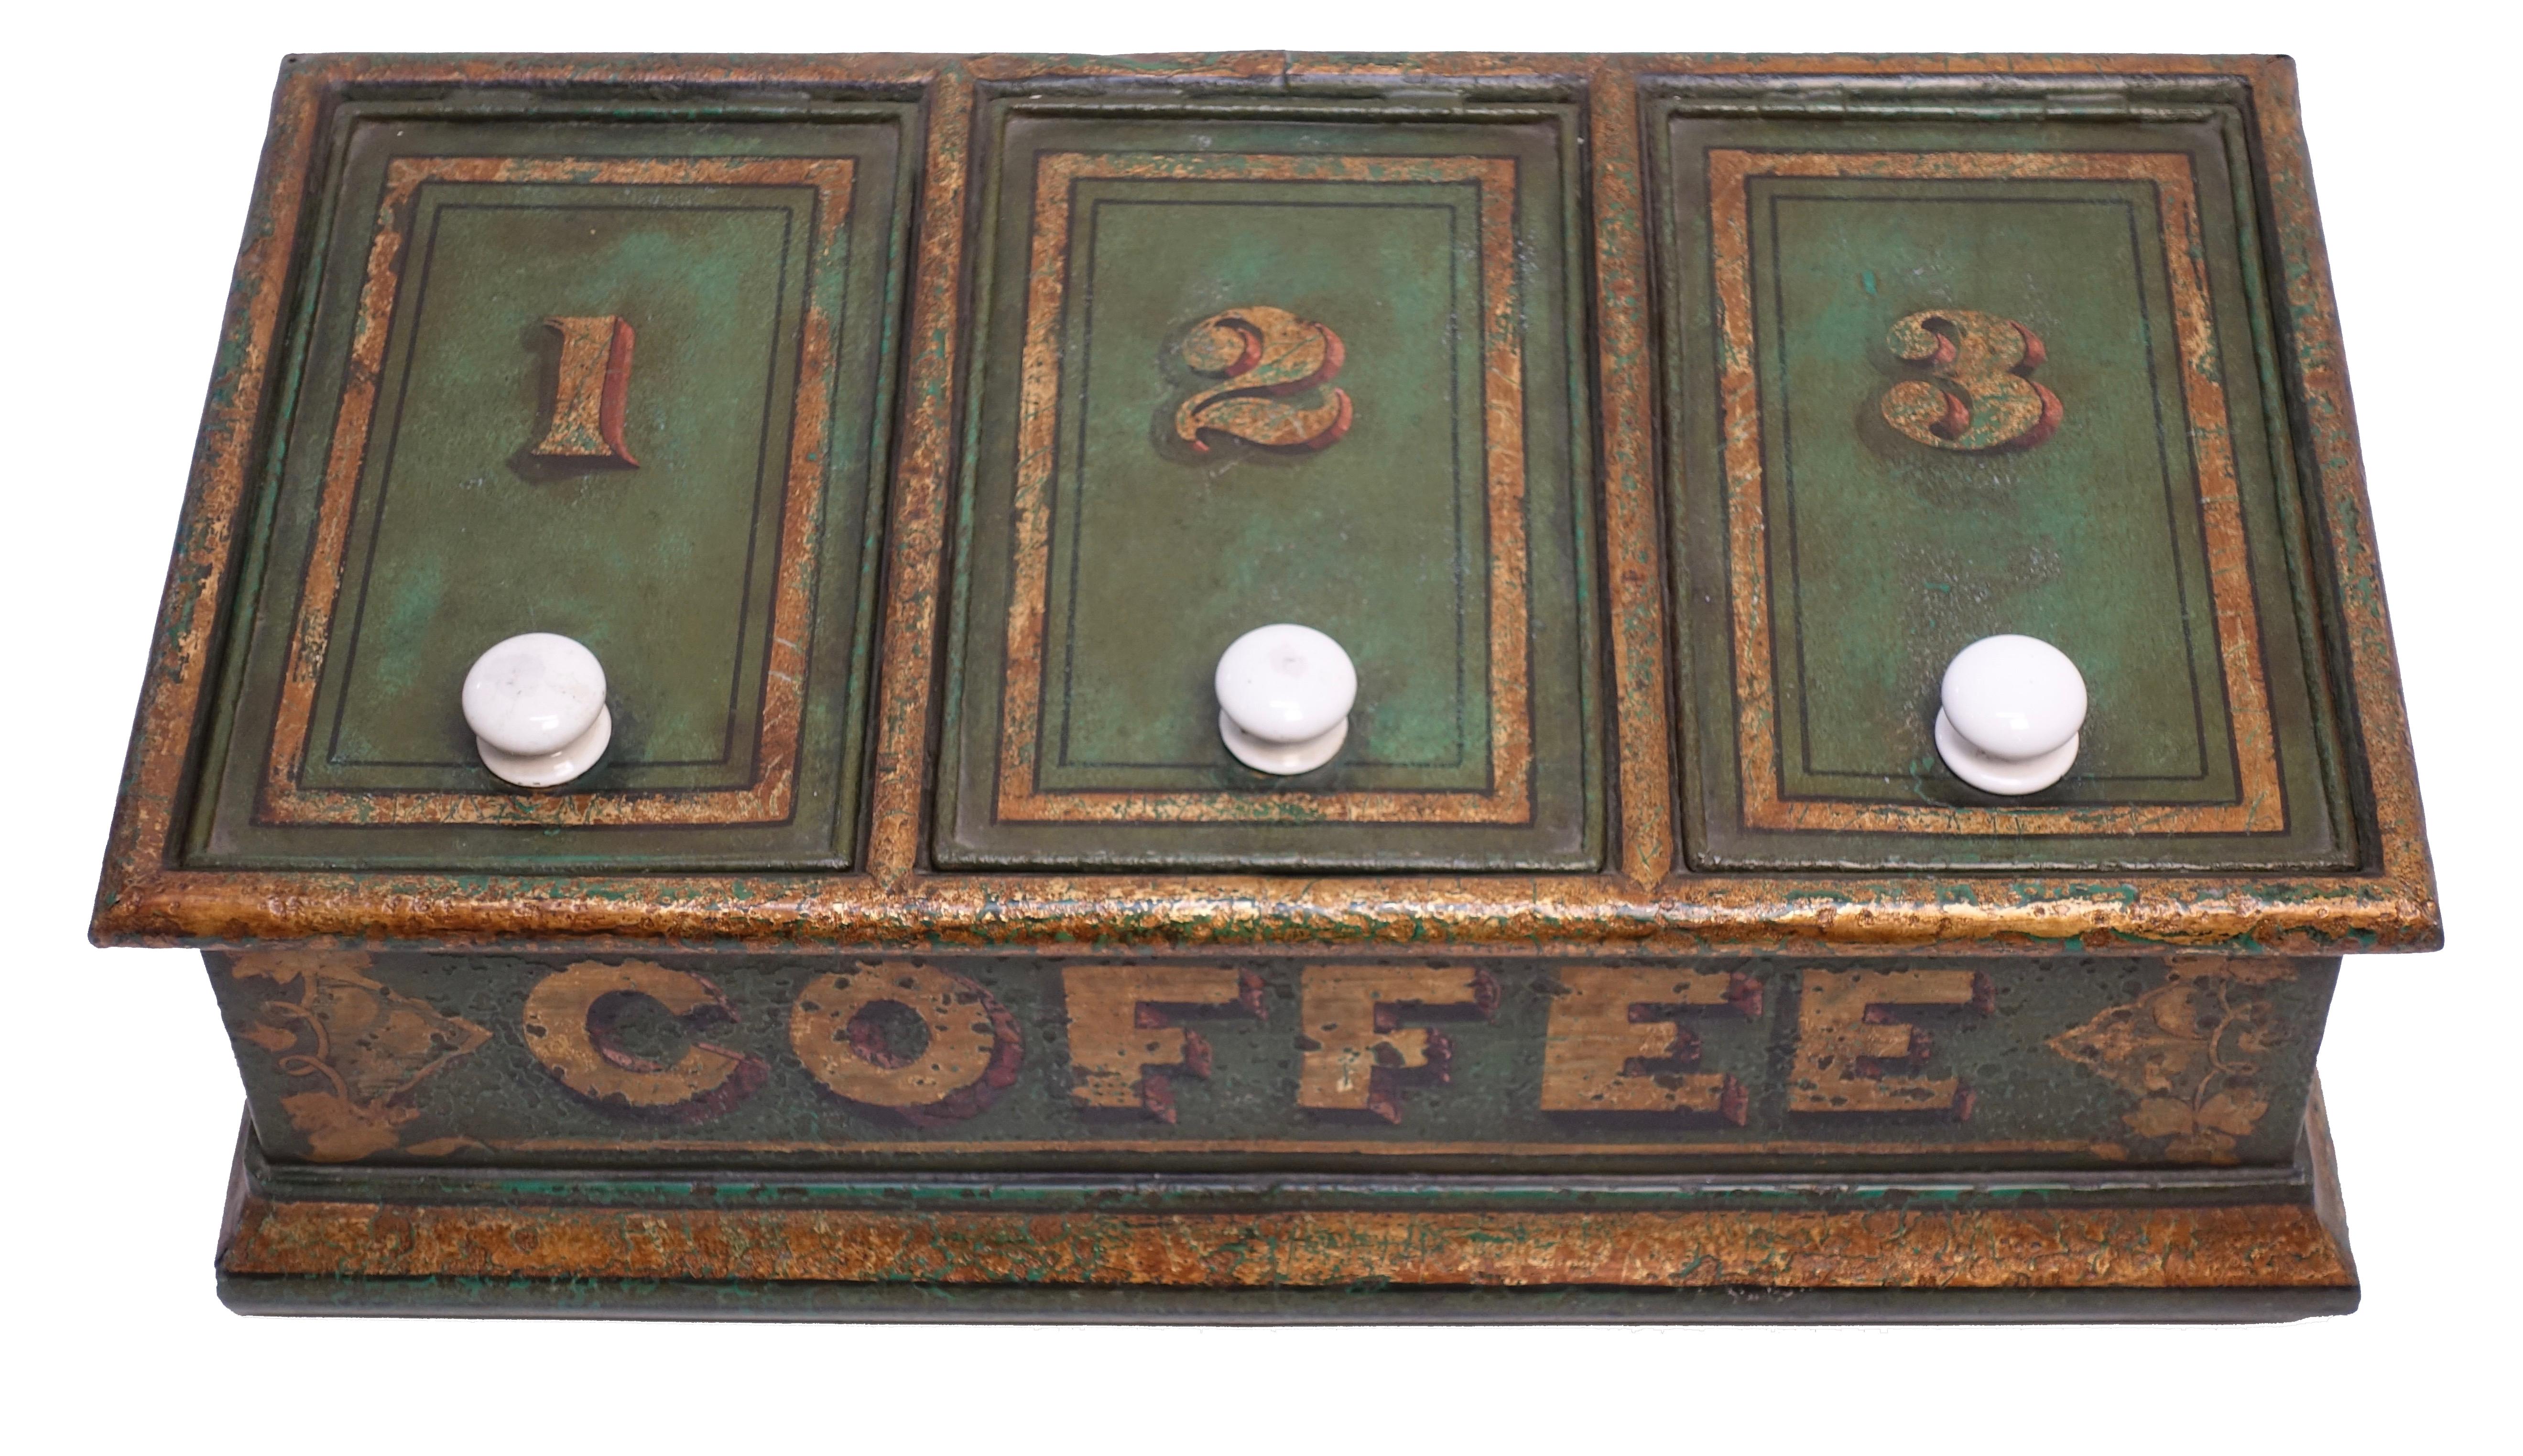 Wonderful old tole painted green and parcel-gilt store display bin for coffee, English, circa 1830, 19th century.